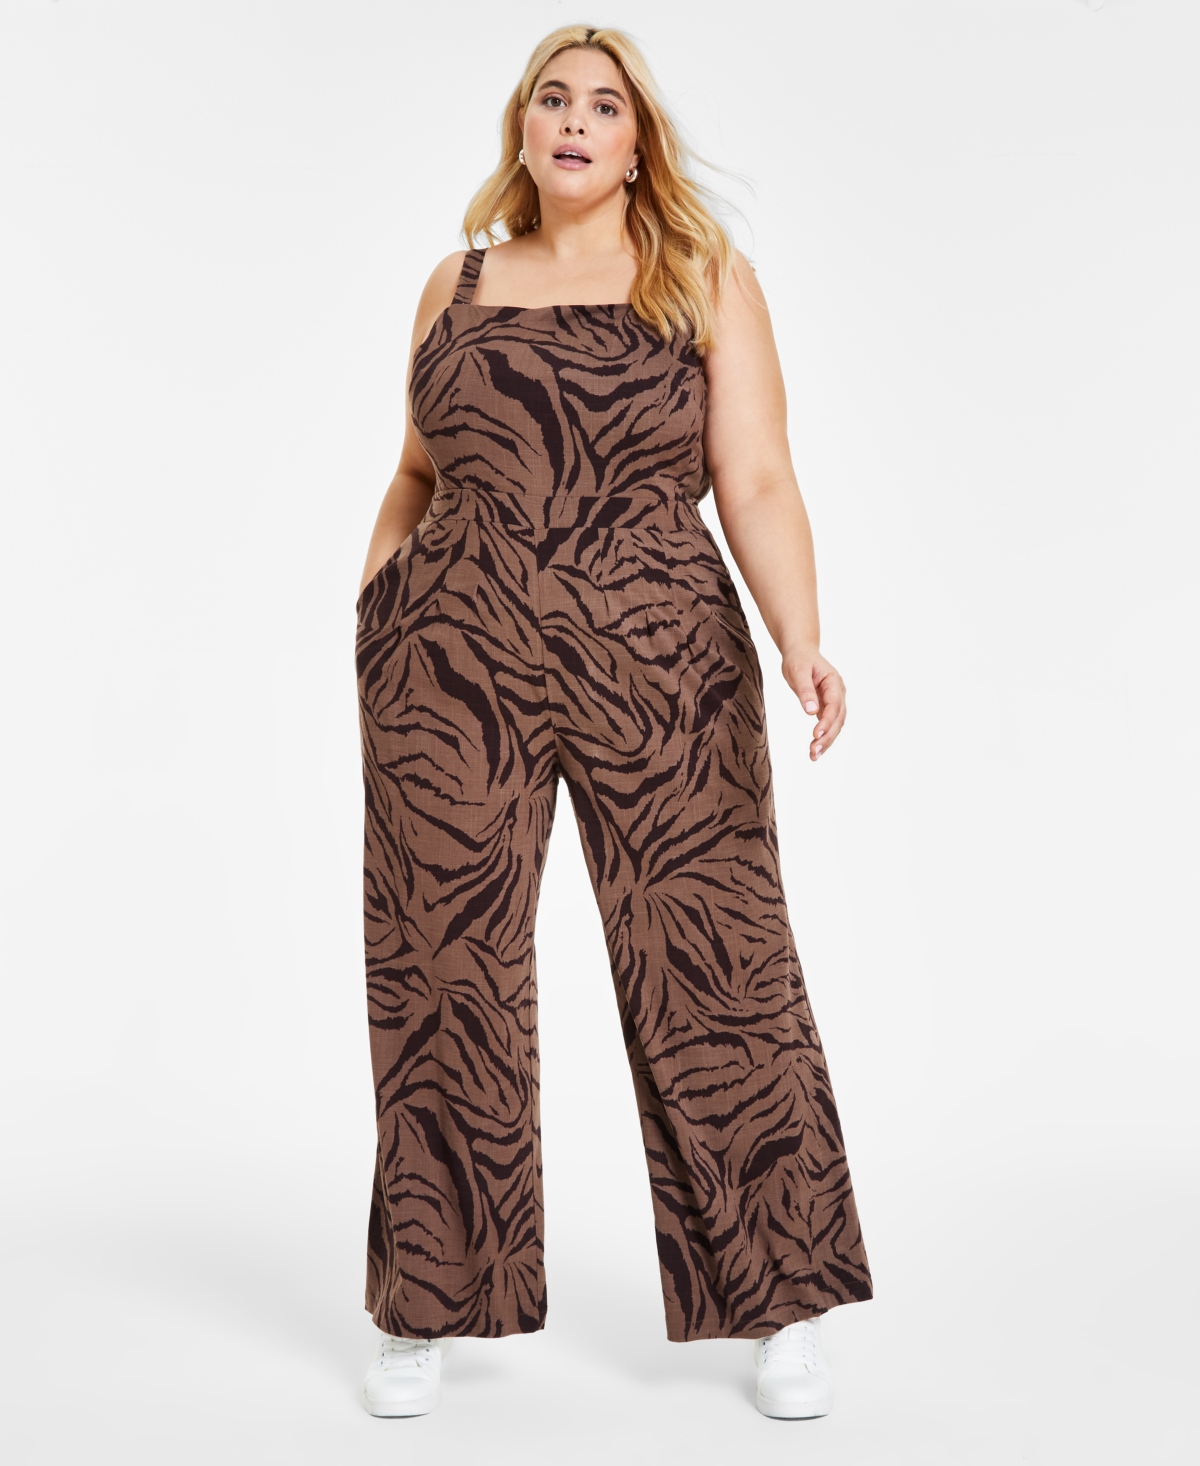 Bar Iii Plus Size Printed Sleeveless Jumpsuit, Created For Macy's In Chelsea Zebra